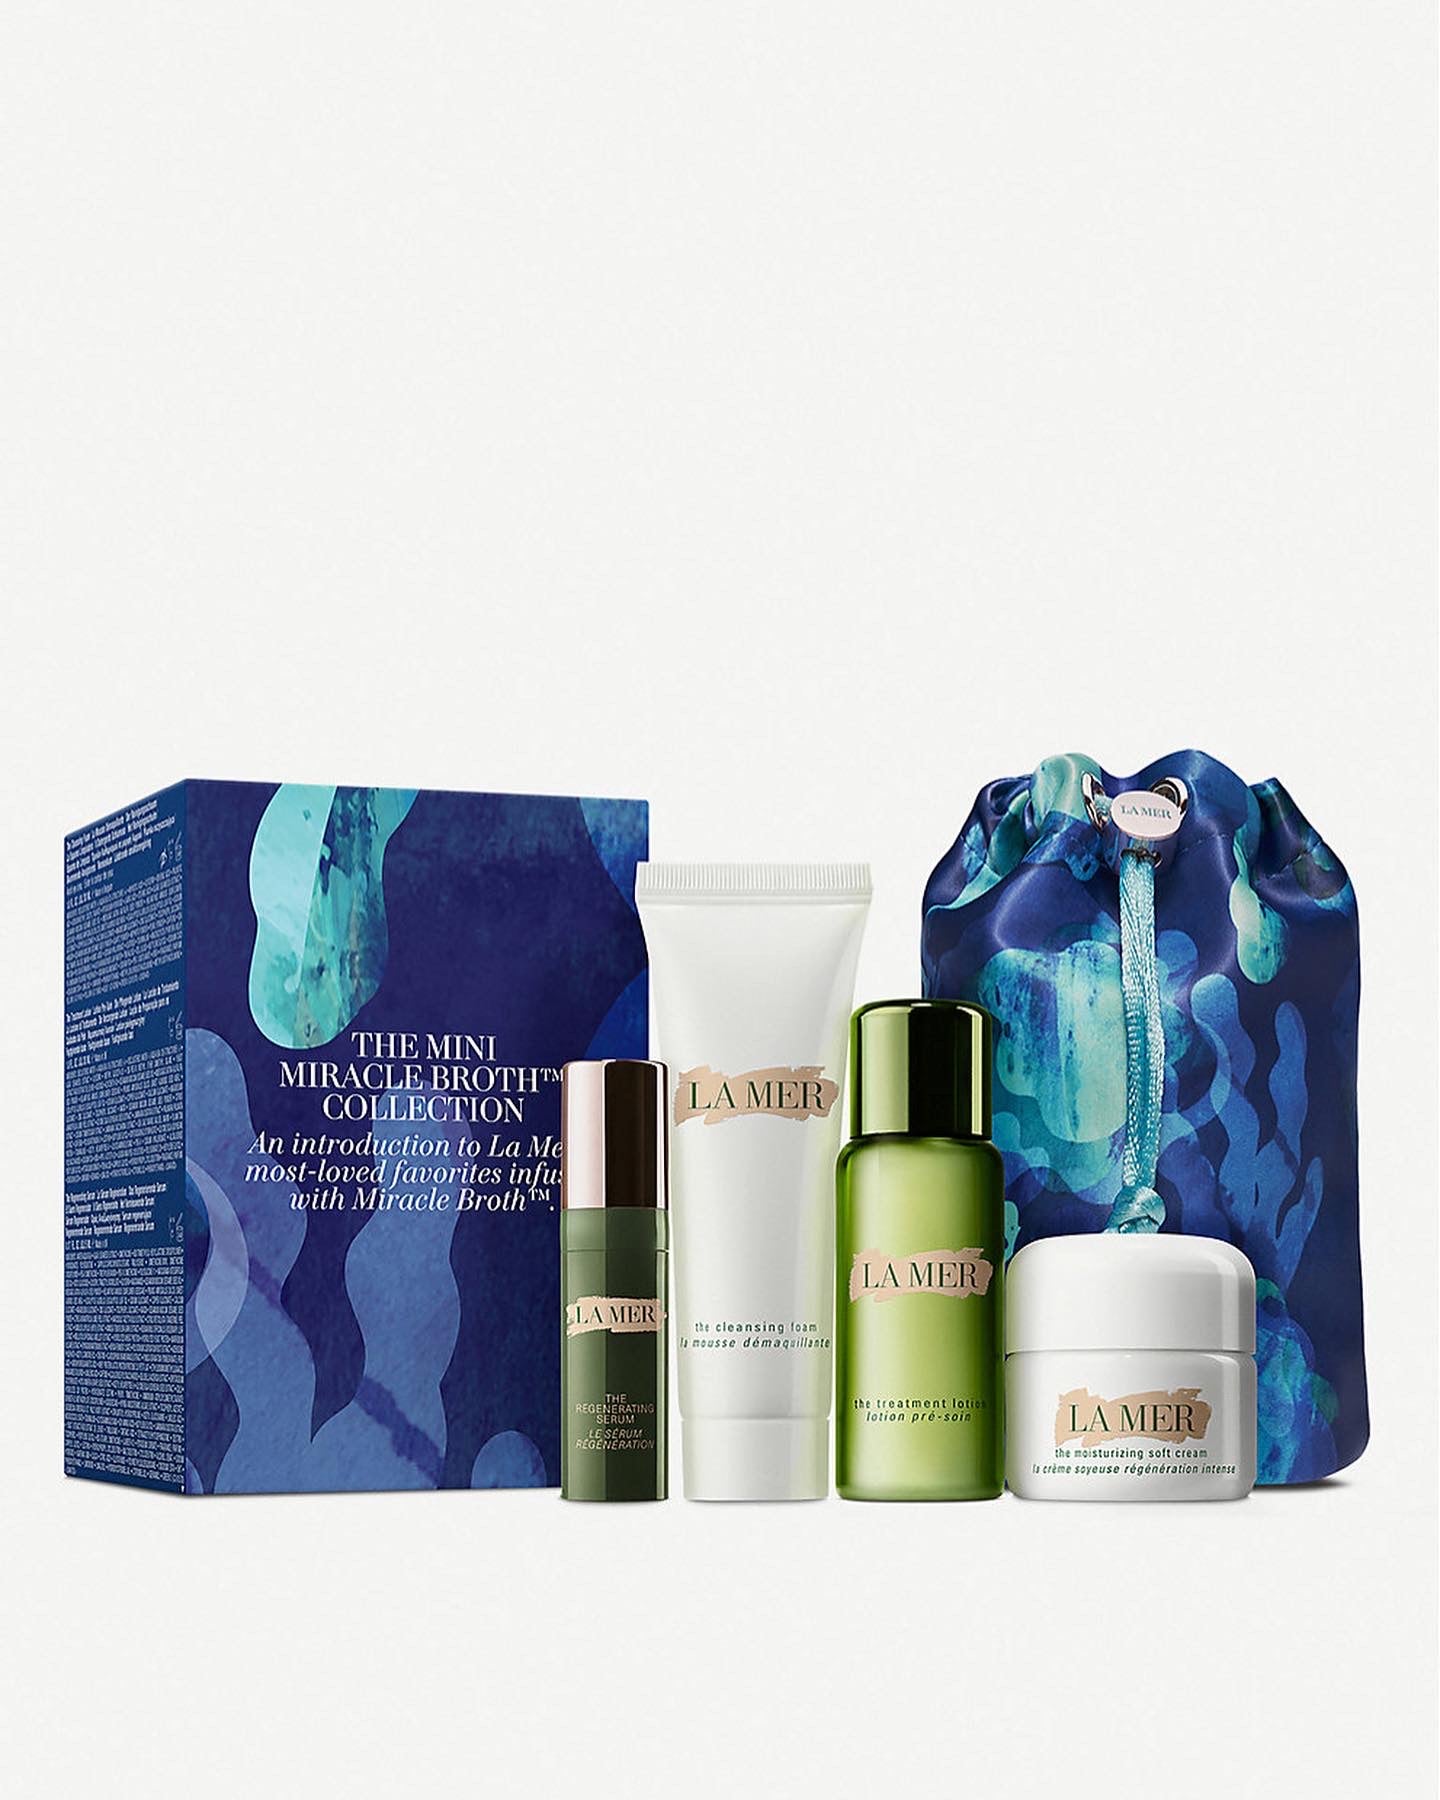 LA MER, THE MINI MIRACLE BROTH COLLECTION